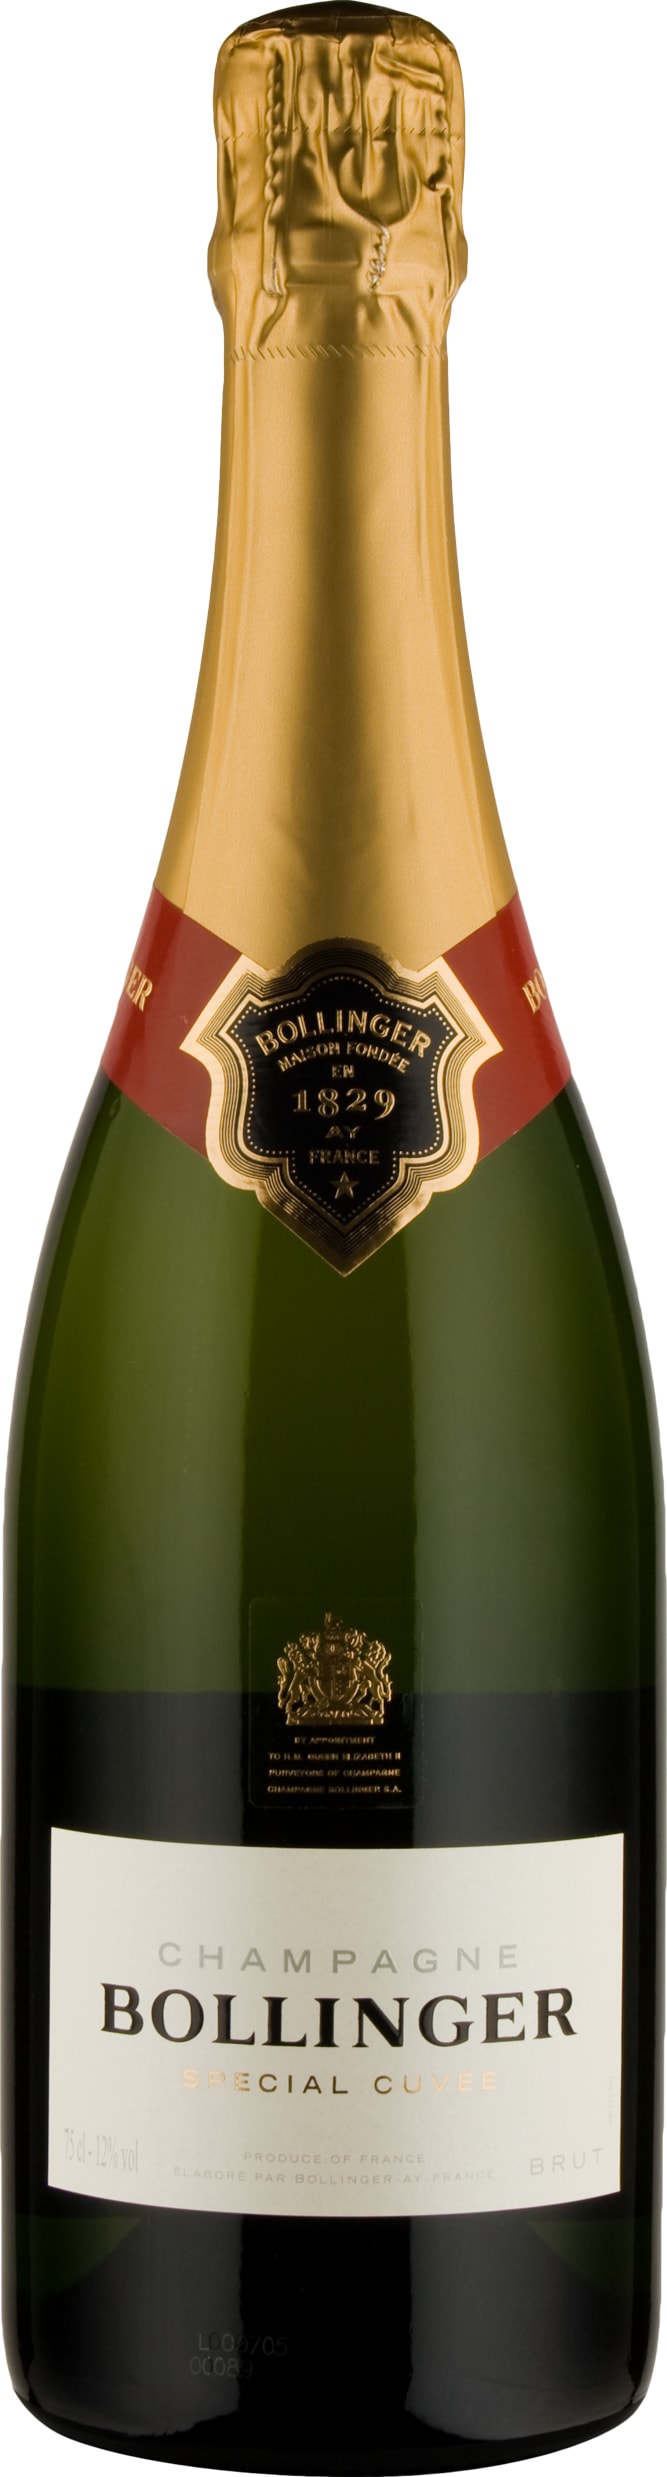 Bollinger Champagne Special Cuvee 75cl NV - Buy Bollinger Wines from GREAT WINES DIRECT wine shop